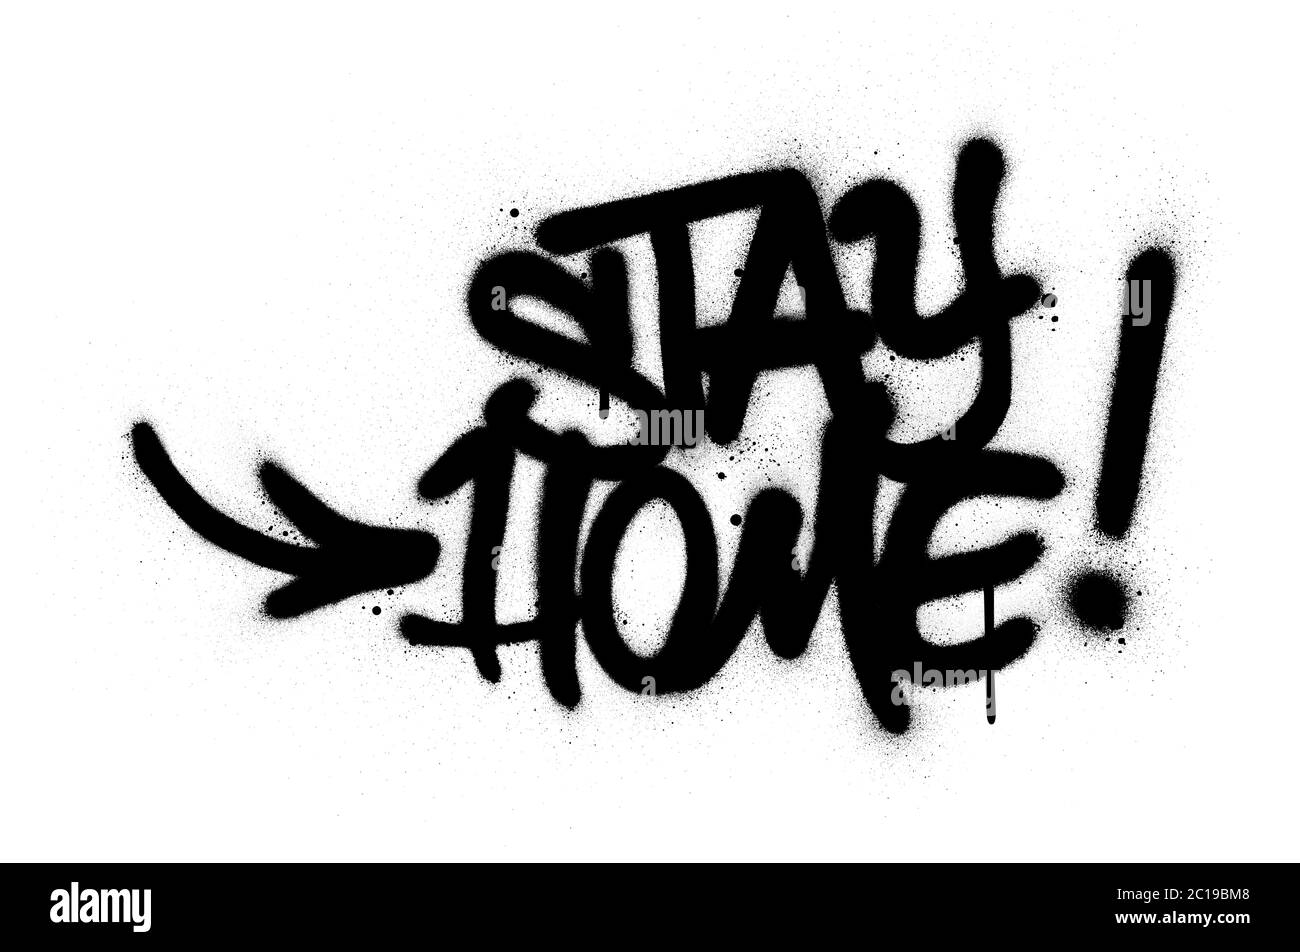 graffiti stay home text sprayed in black over white Stock Vector